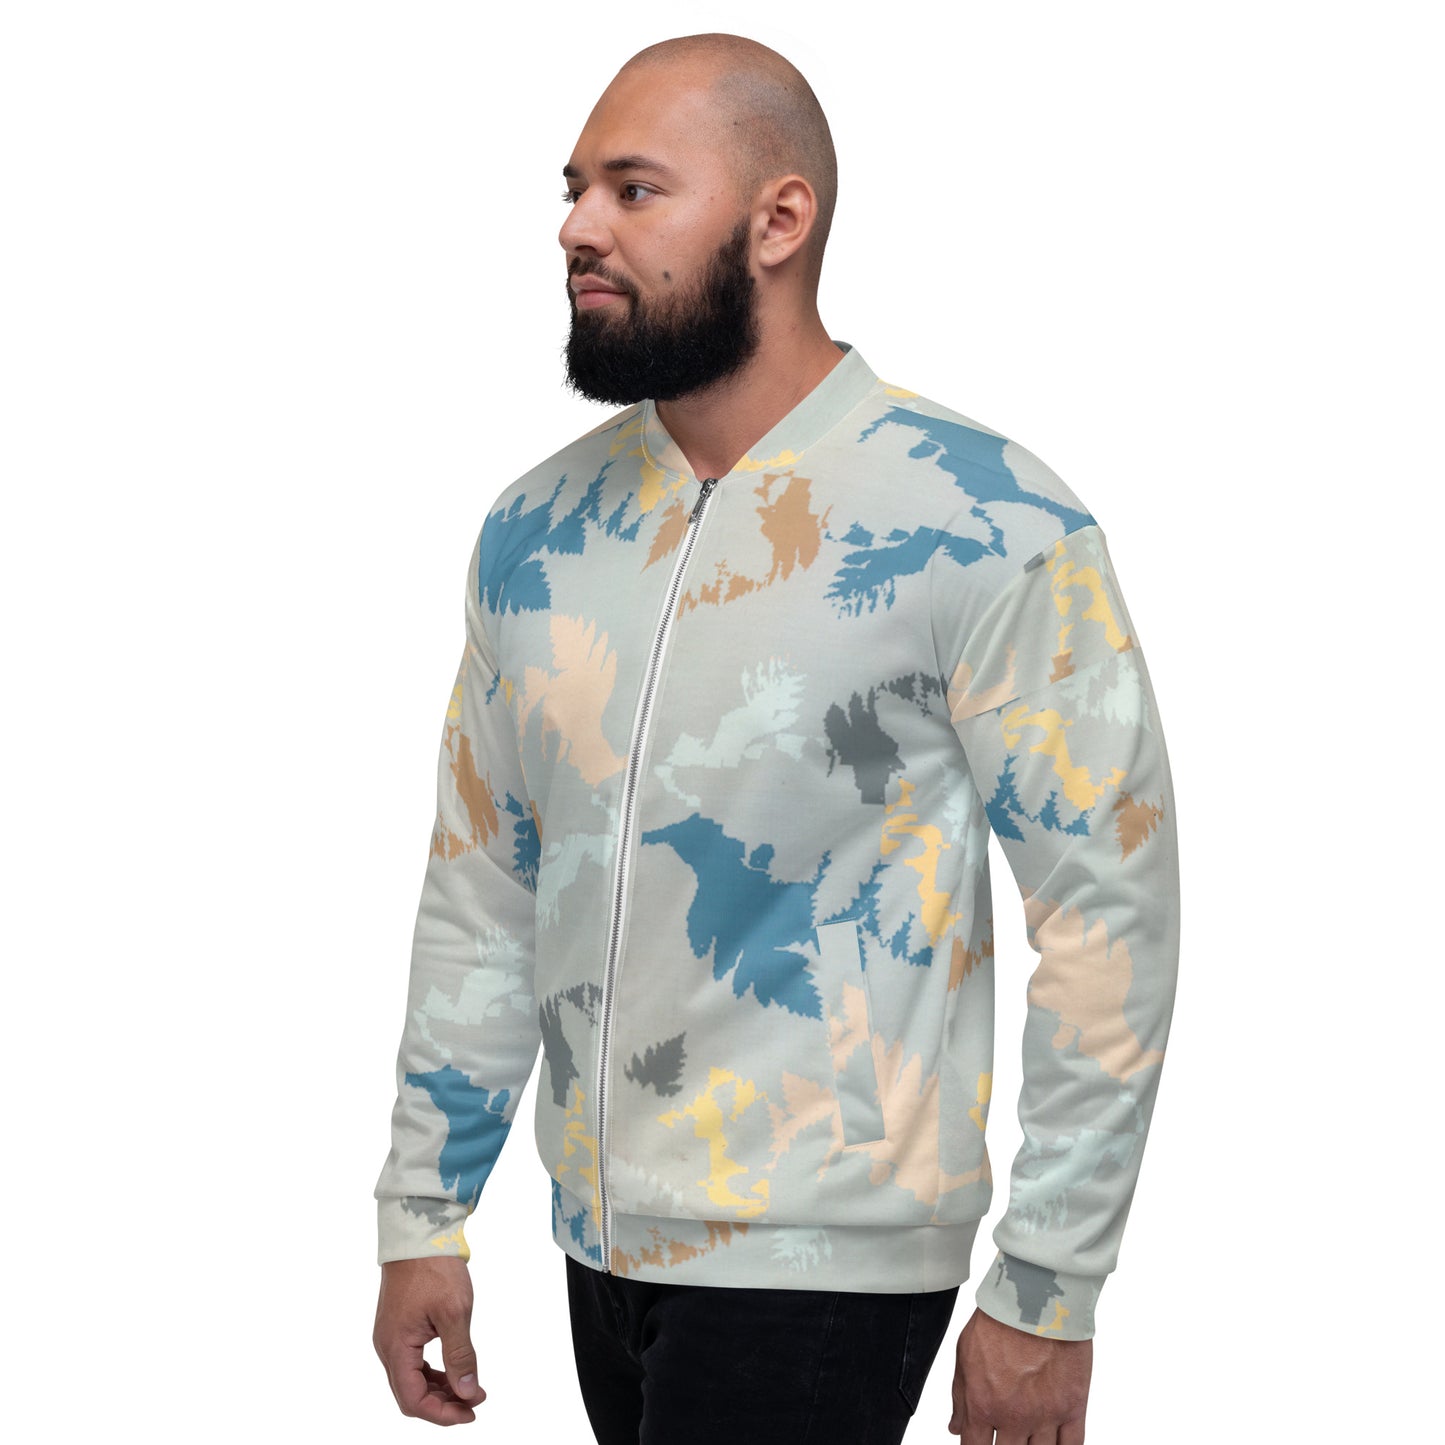 Recycled Unisex Bomber Jacket - Abstract Forest - Men